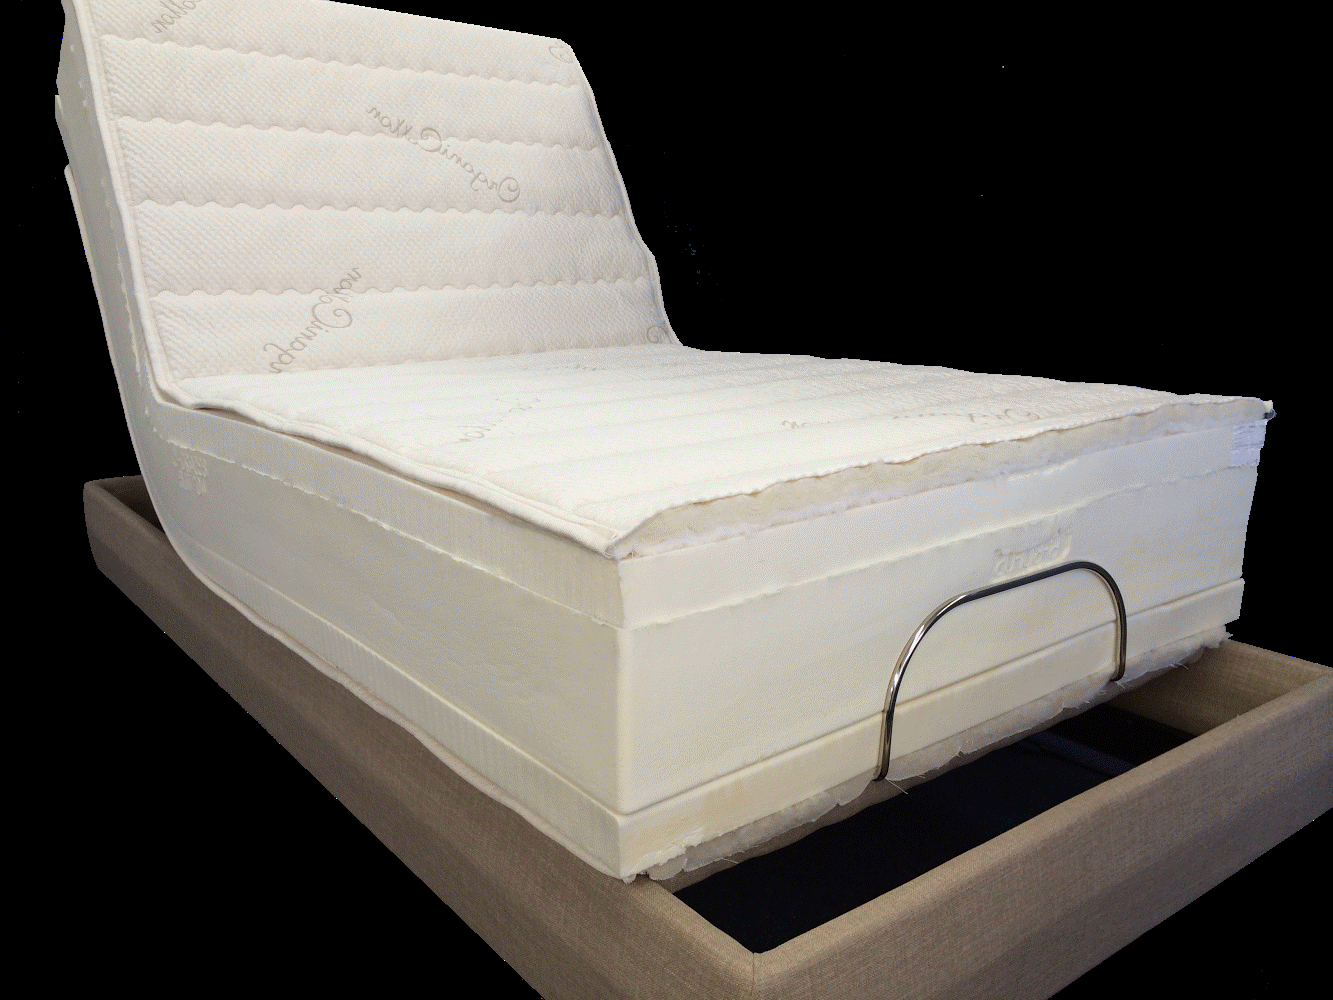 THE ULTIMATE in LA Fontana no toxin latex-pedic natural organic pure certified chemical free cotton and wool adjustable bed mattresses